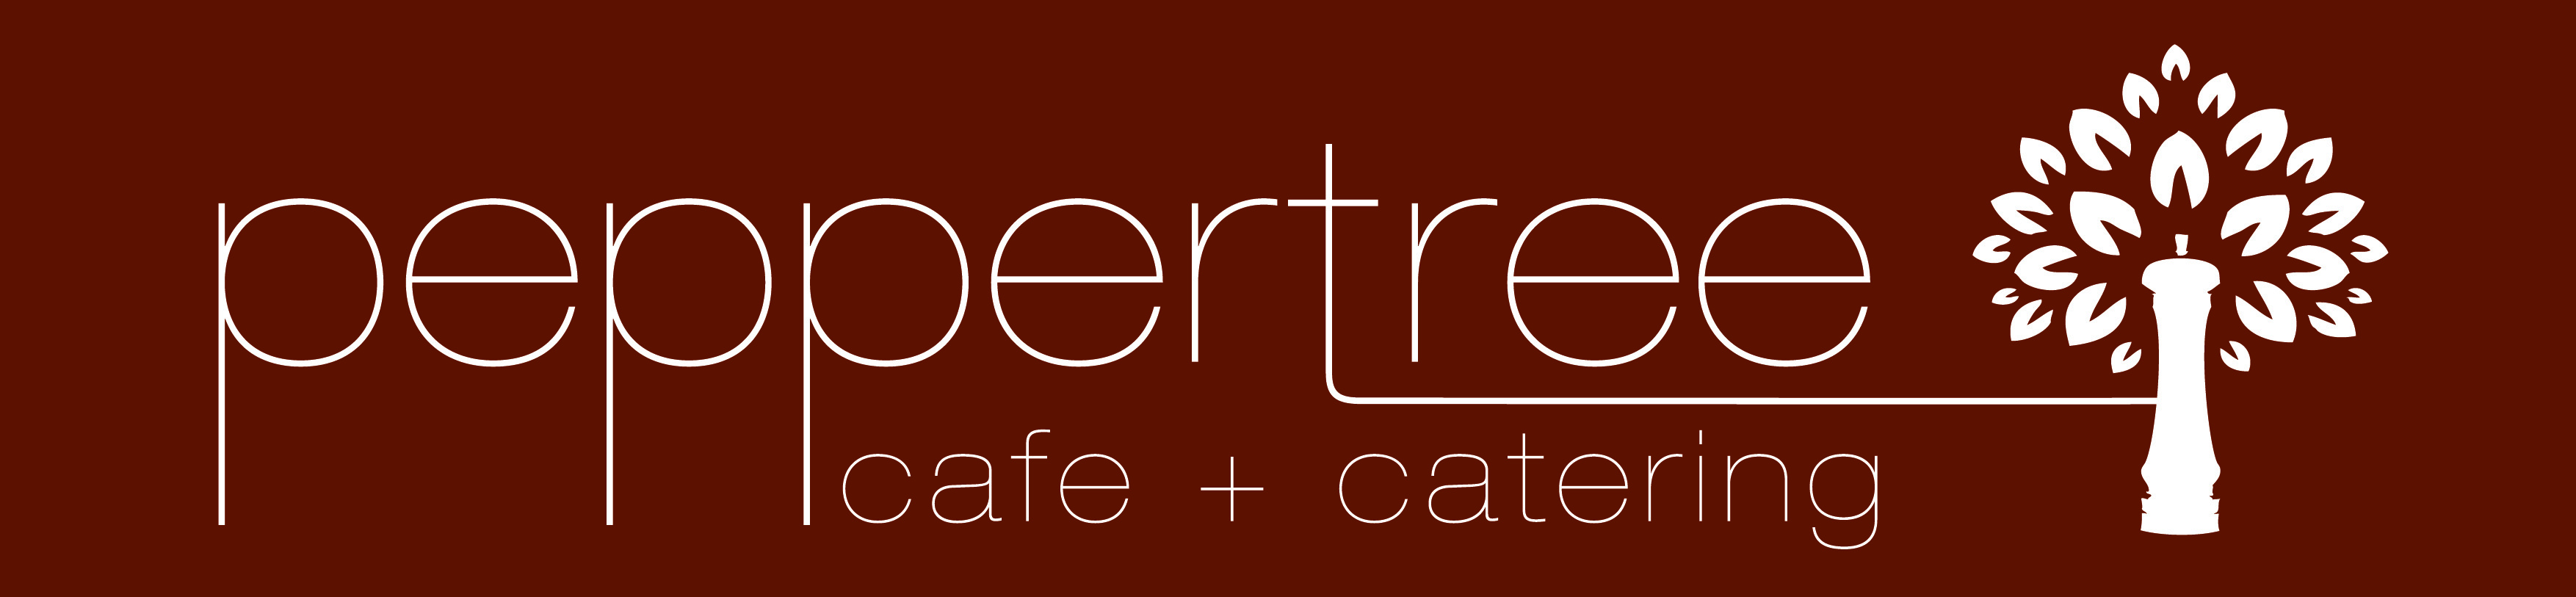 Peppertree Cafe